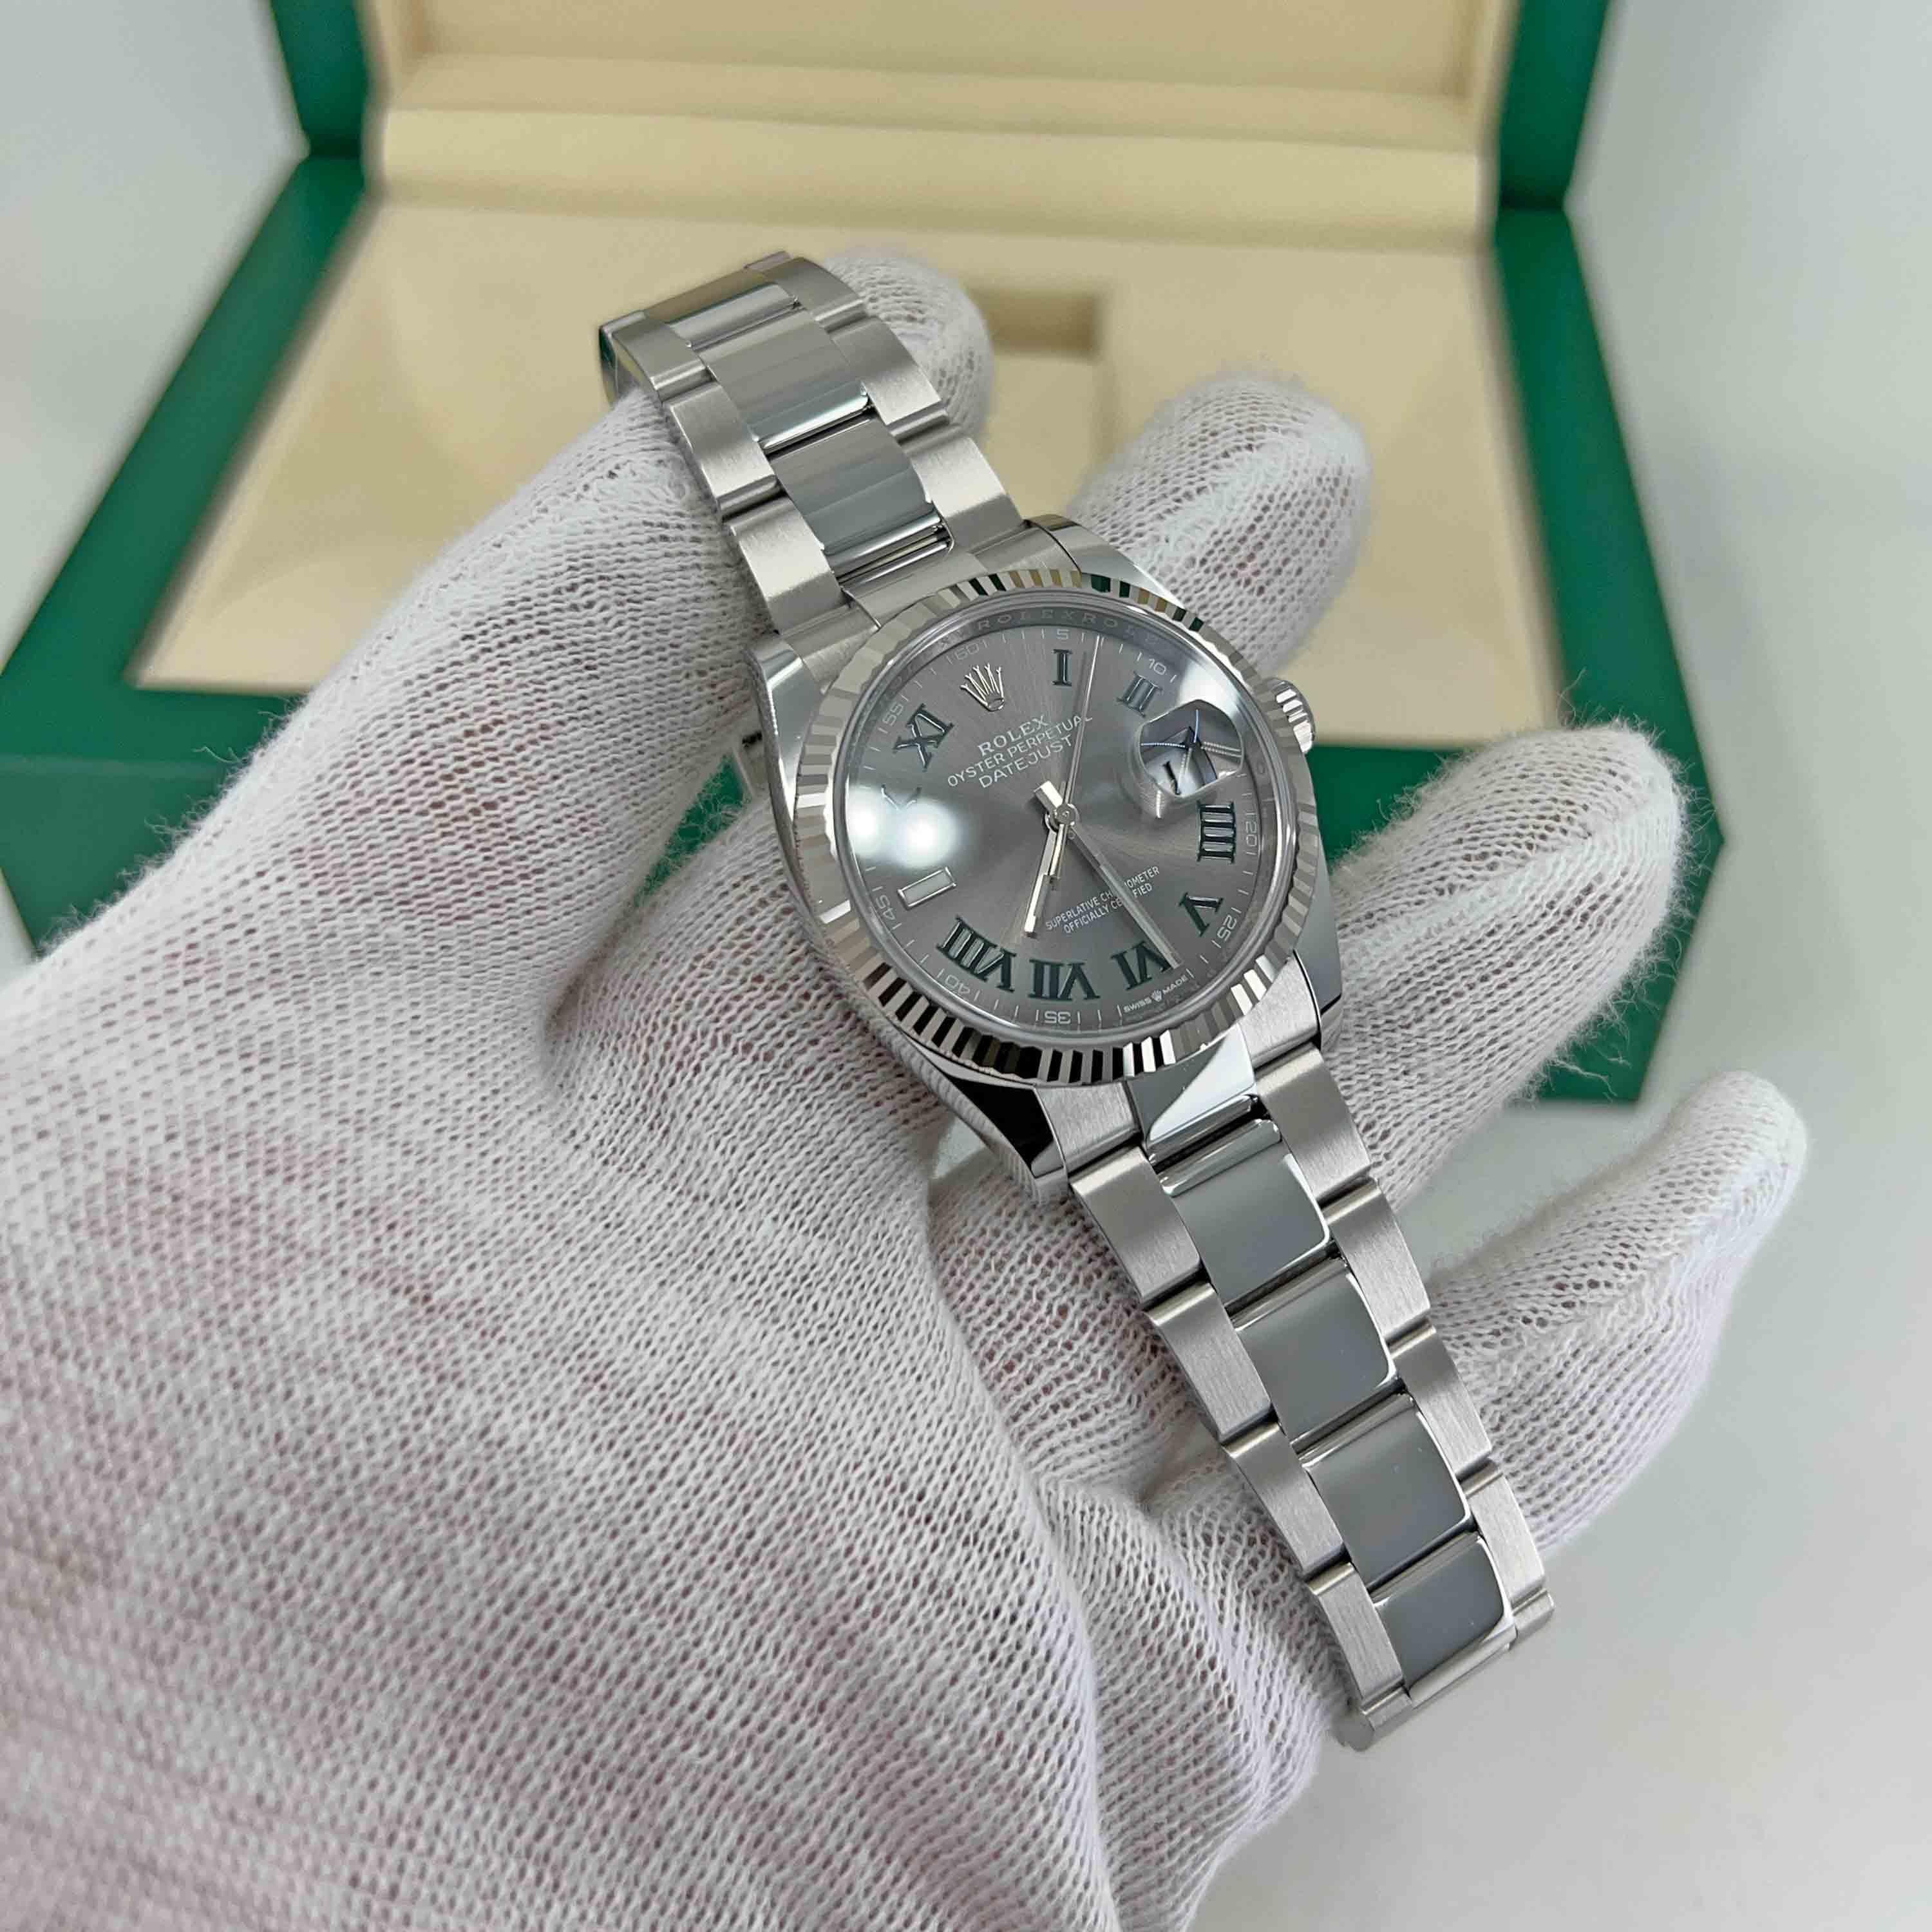 Rolex Datejust, Green Slate Roman, Oyster, Fluted, 126234, Unworn Watch Complete For Sale 1